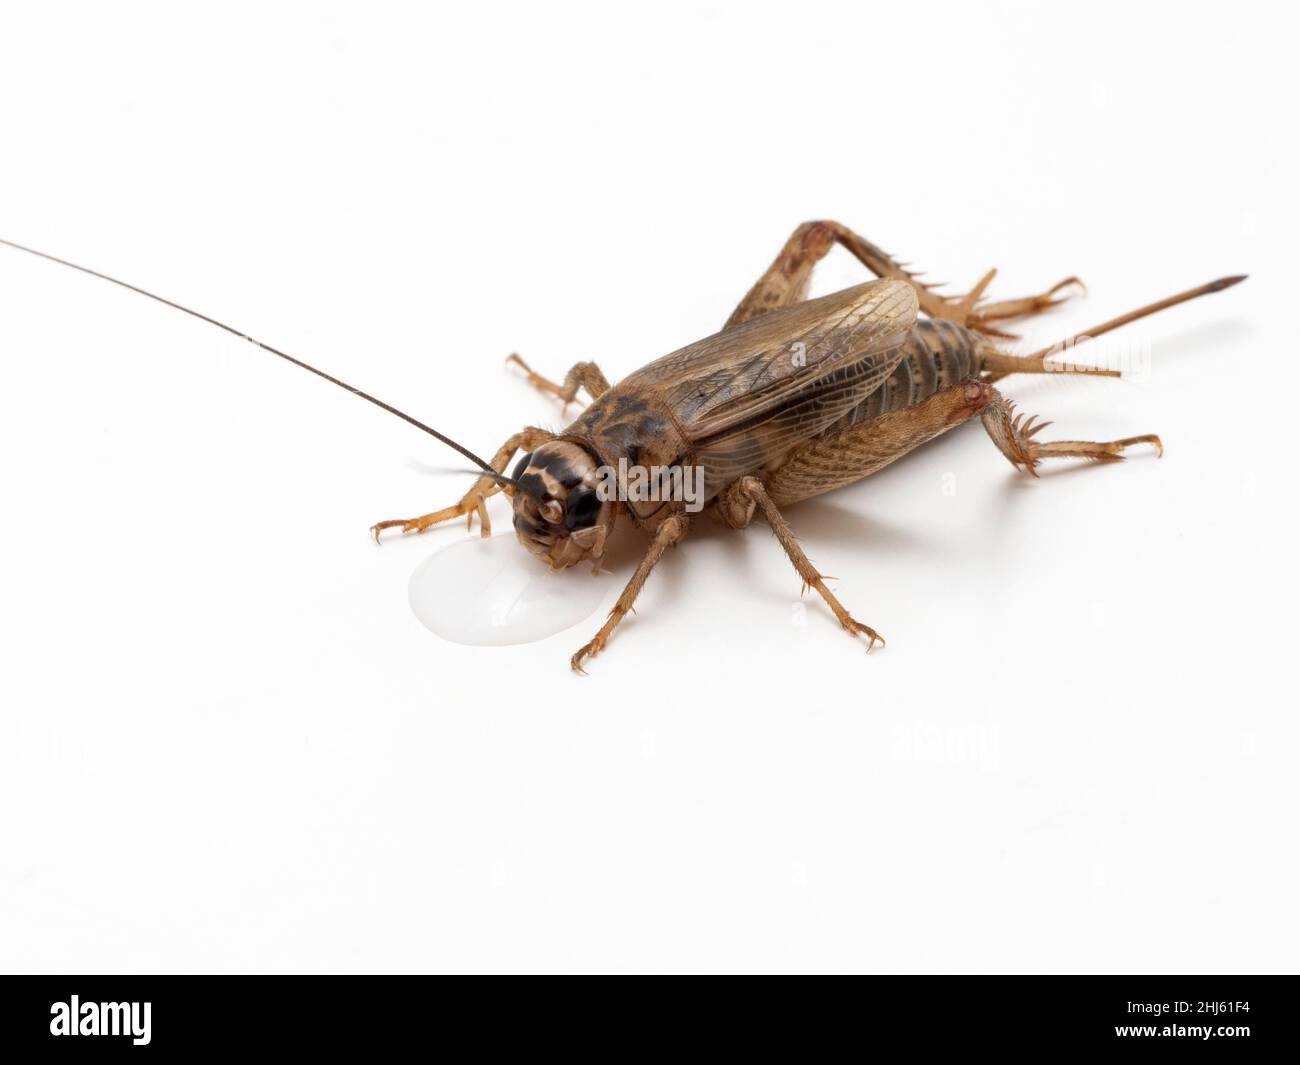 Adult female house cricket (Acheta domesticus) drinking from a drop of water. Isolated. This species is a standard feeder insect for the pet and resea Stock Photo